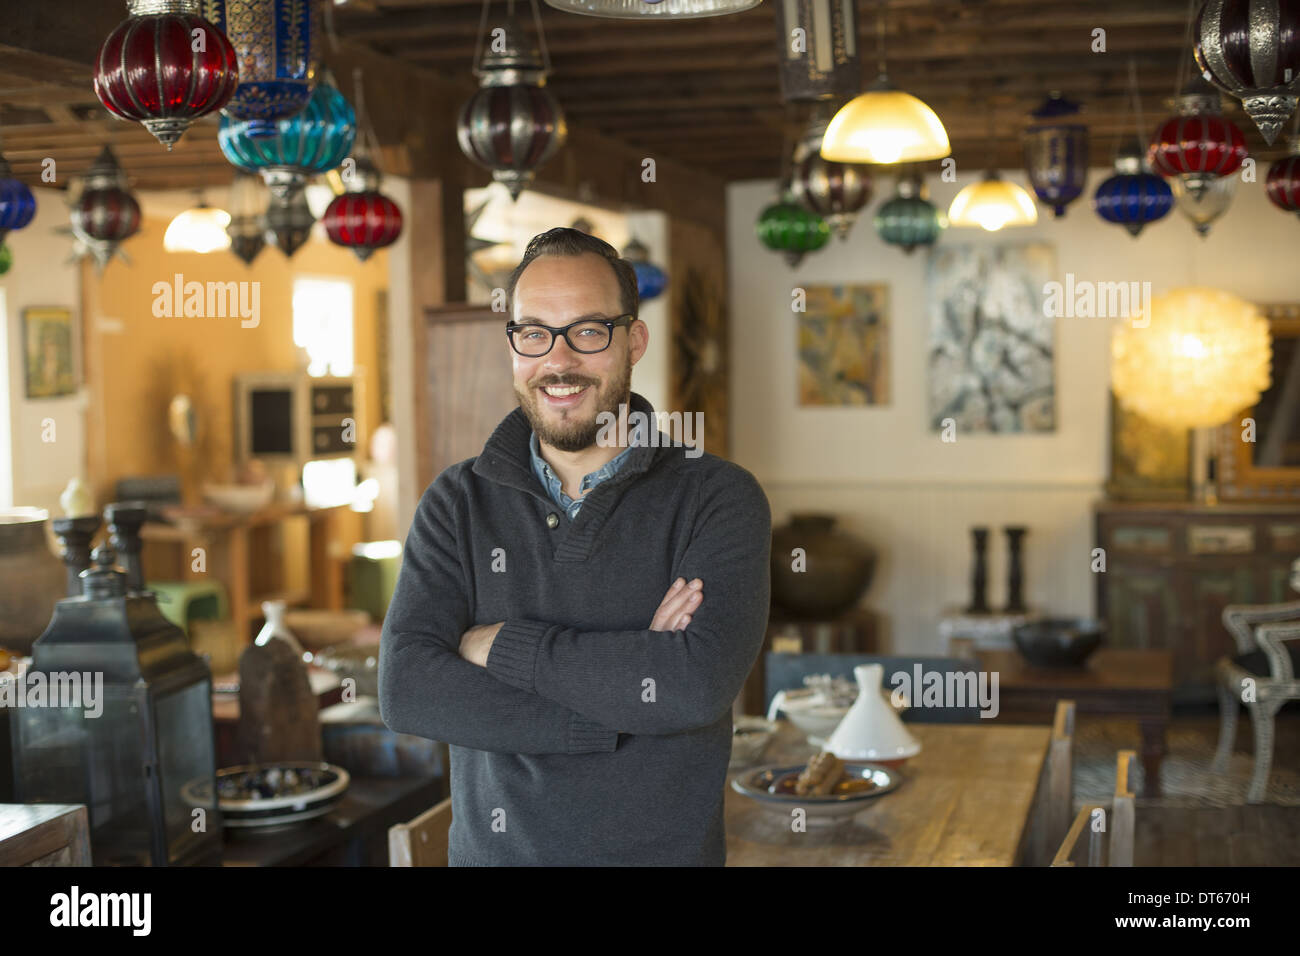 A man standing in a shop full of antique and decorative objects. Antique shop displays. Lighting, glass shades and furniture. Stock Photo